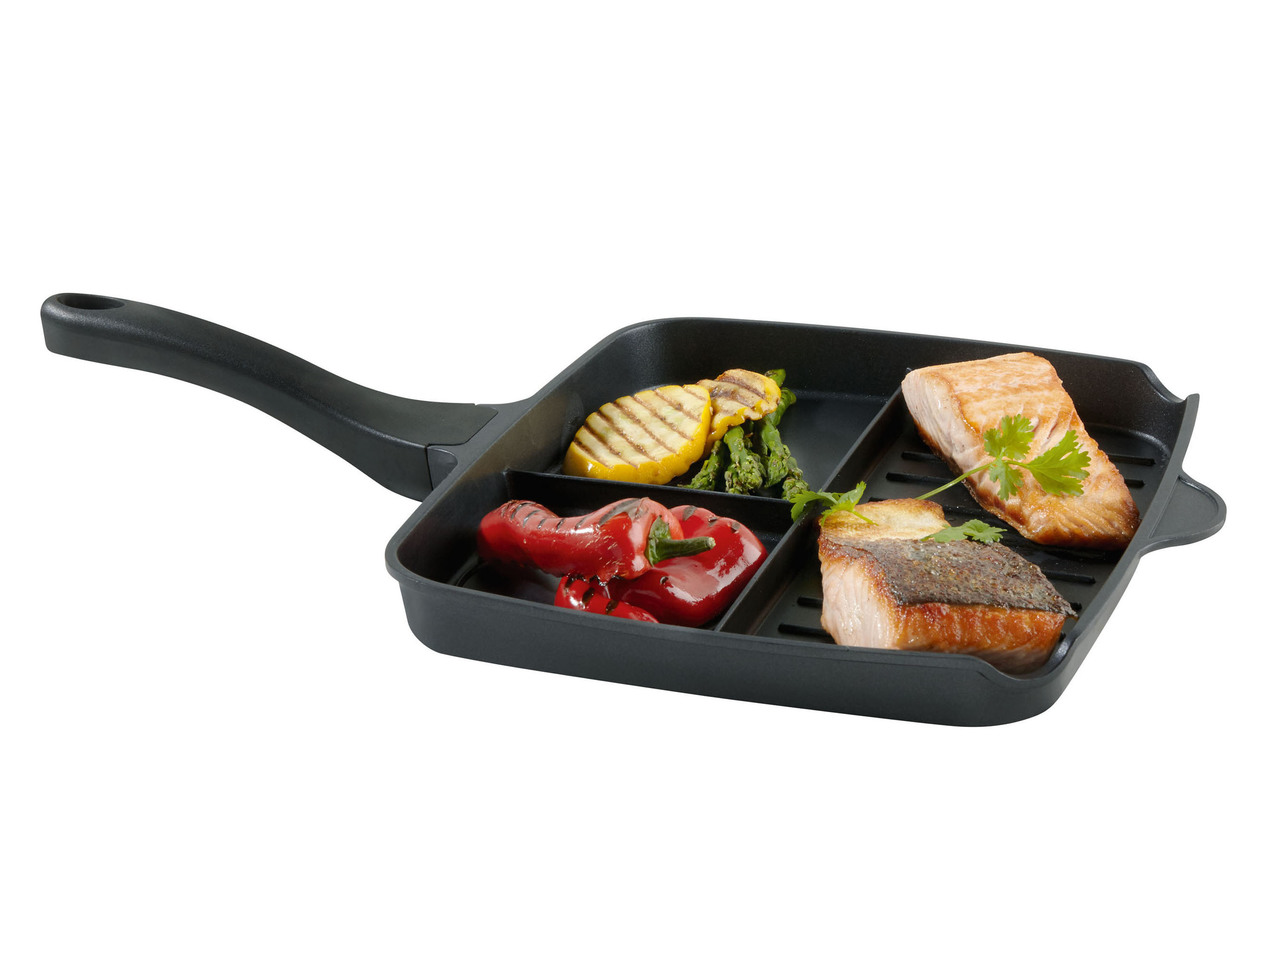 Multi-Section Pan or Multi-Section Griddle & Baking Tray